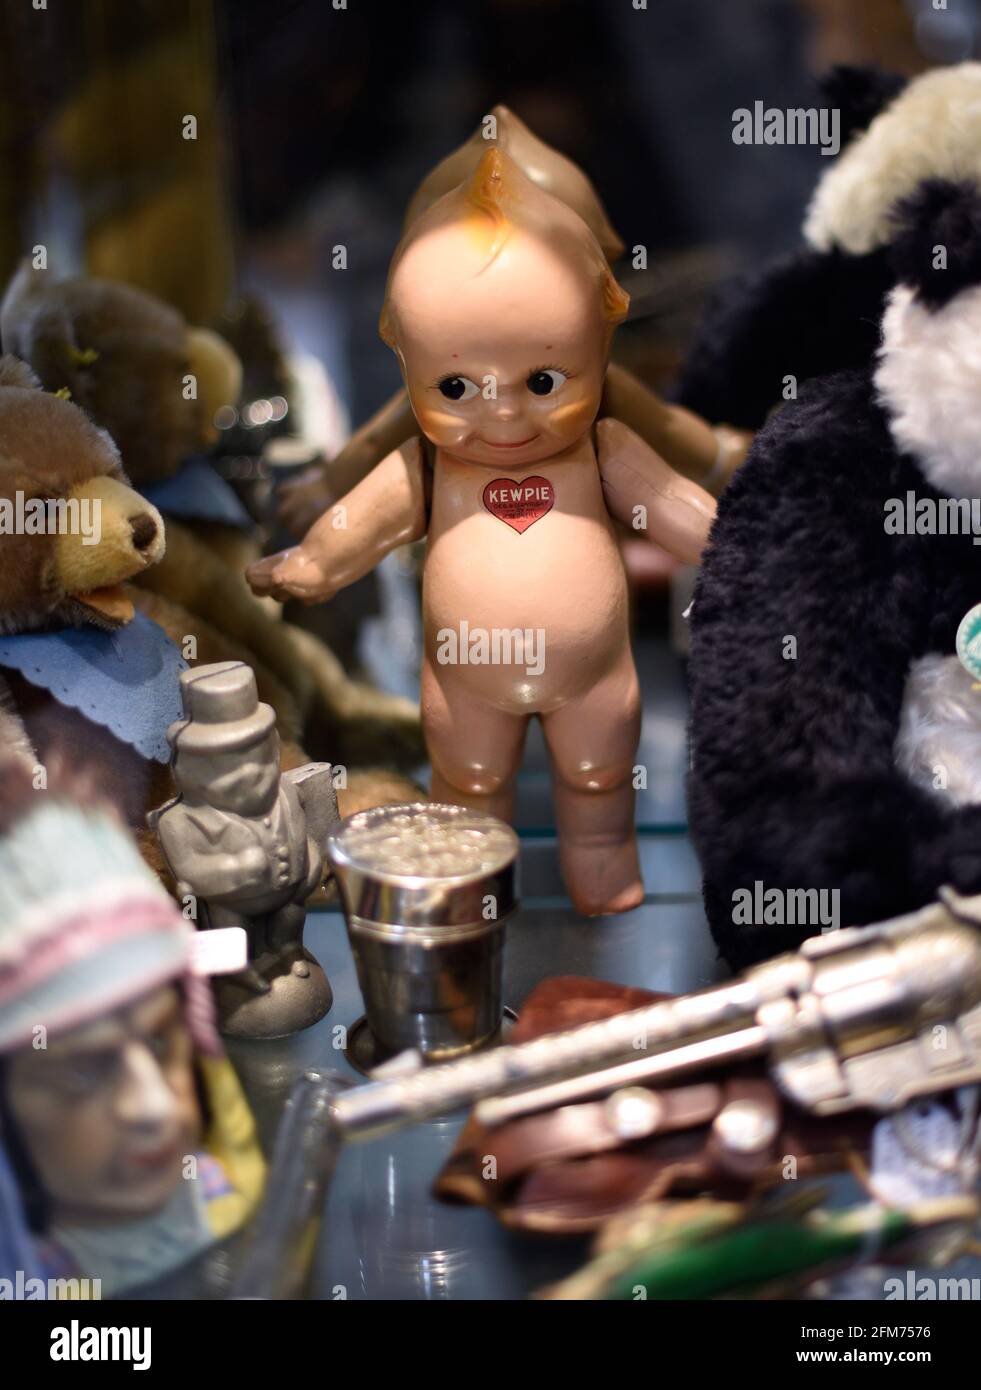 A vintage Kewpie doll for sale in an antique shop in Santa Fe, New Mexico. Stock Photo